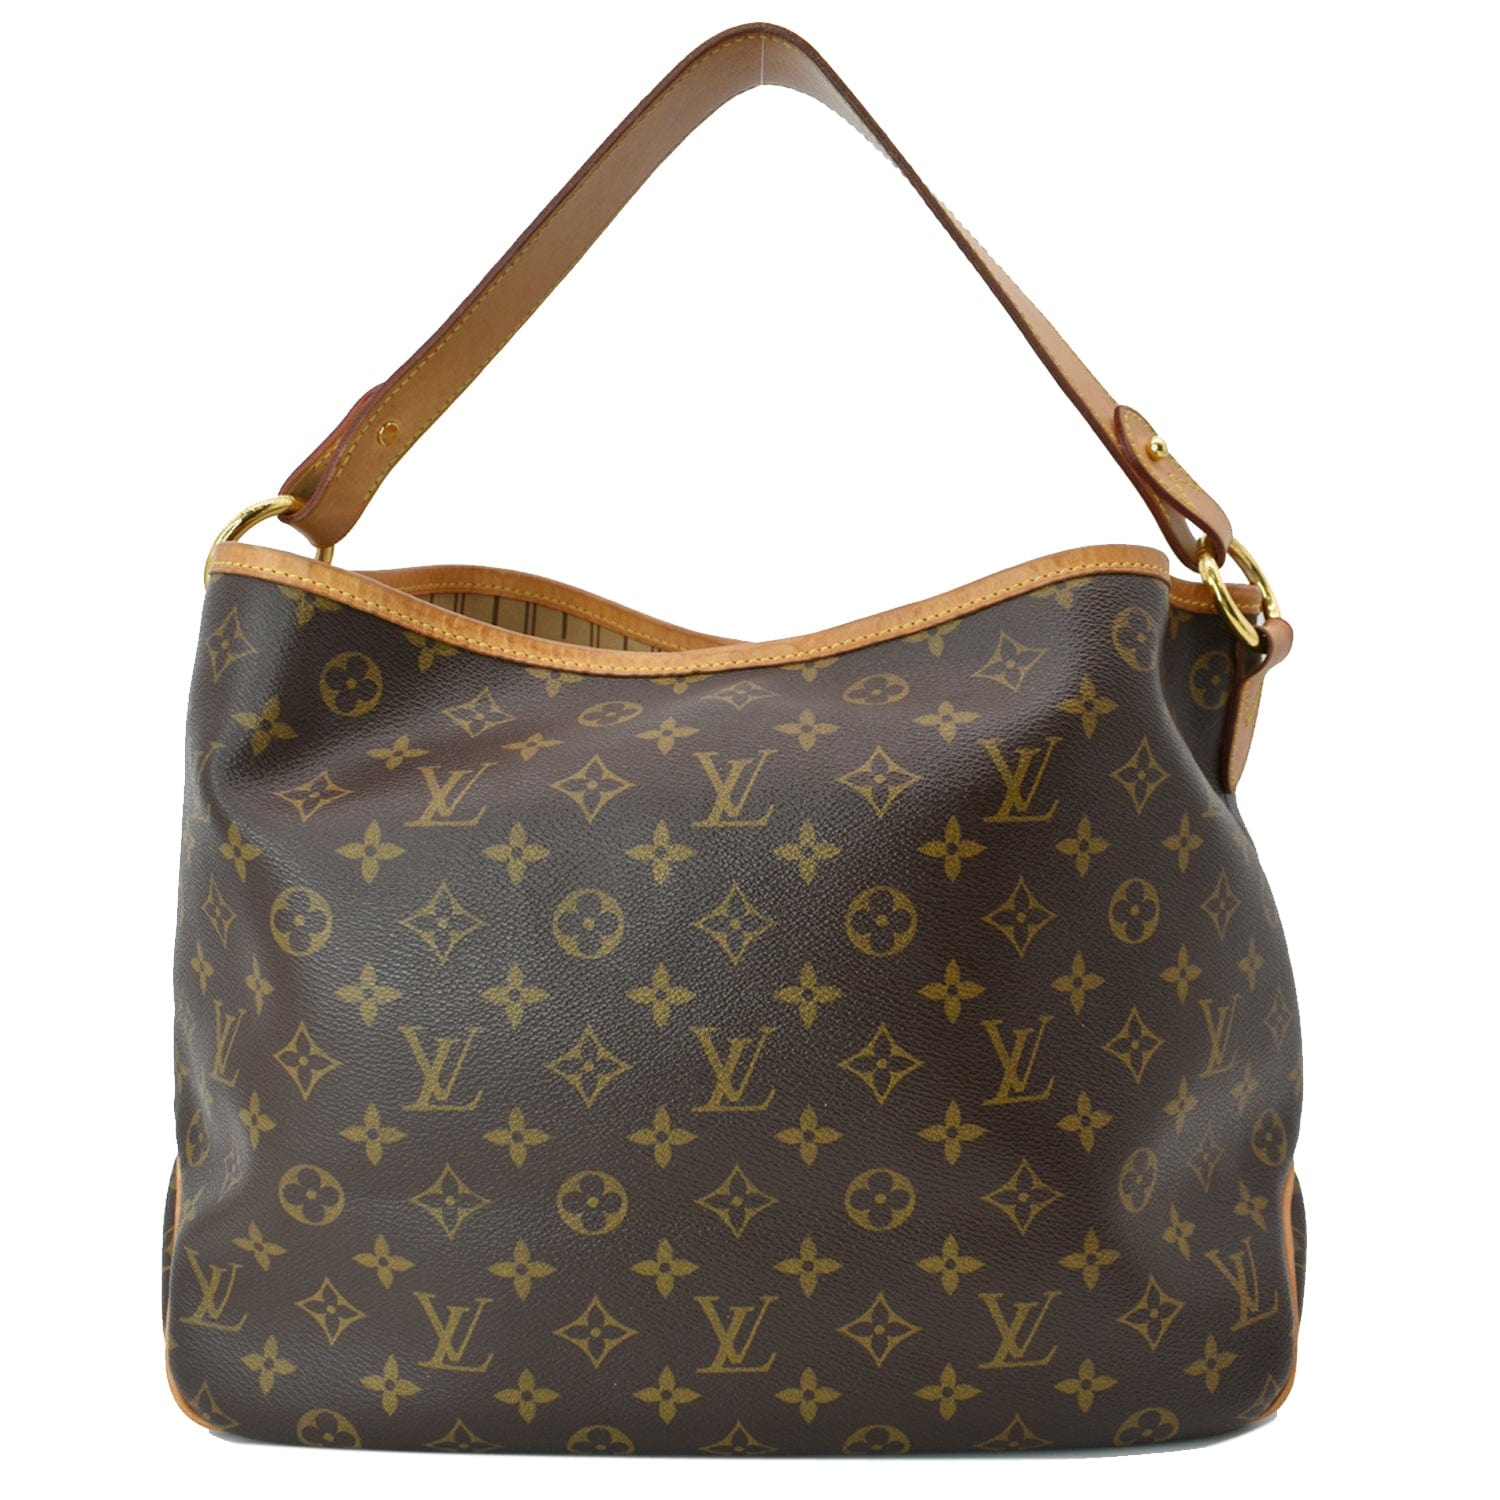 Louis Vuitton Delightful Mm Or Pm